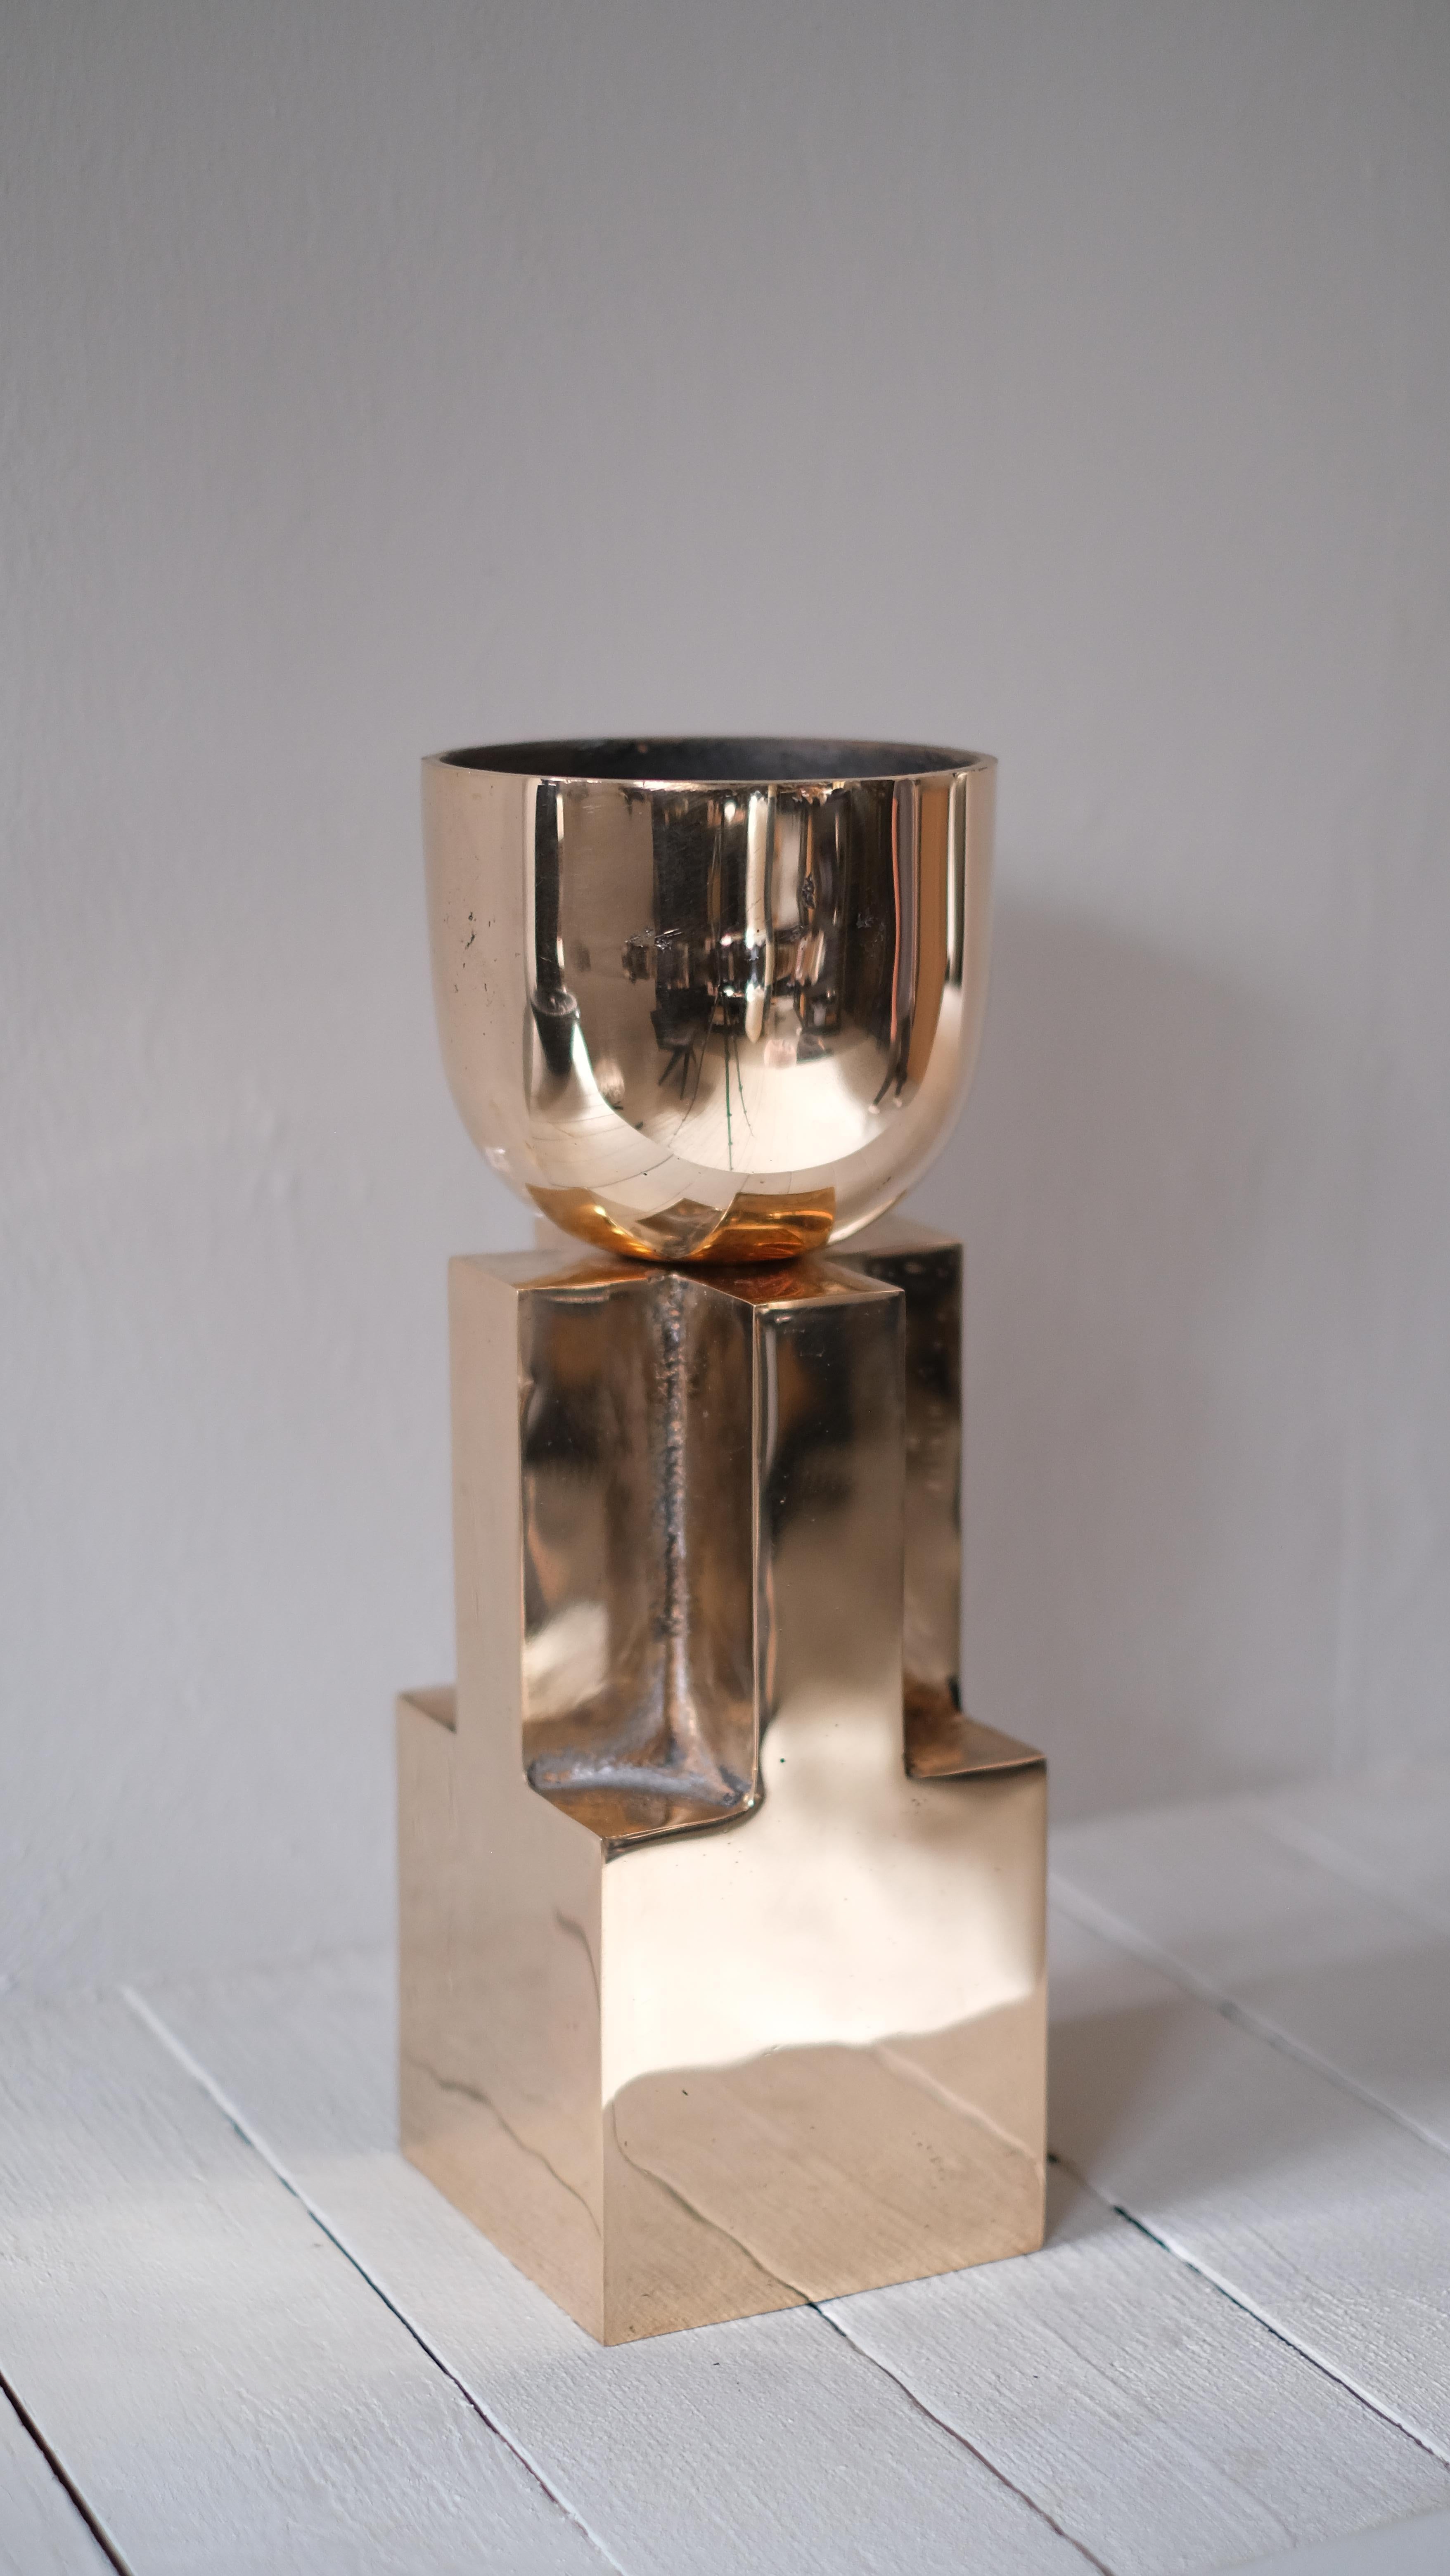 Bronze goblet bowl, signed Arno Declercq
Measures: 14 cm L x 14 cm W x 40 cm H
5.5” L x 5.5” W x 15.7” H
Material: Bronze
Signed by Arno Declercq

Arno Declercq
Belgian designer and art dealer who makes bespoke objects with passion for